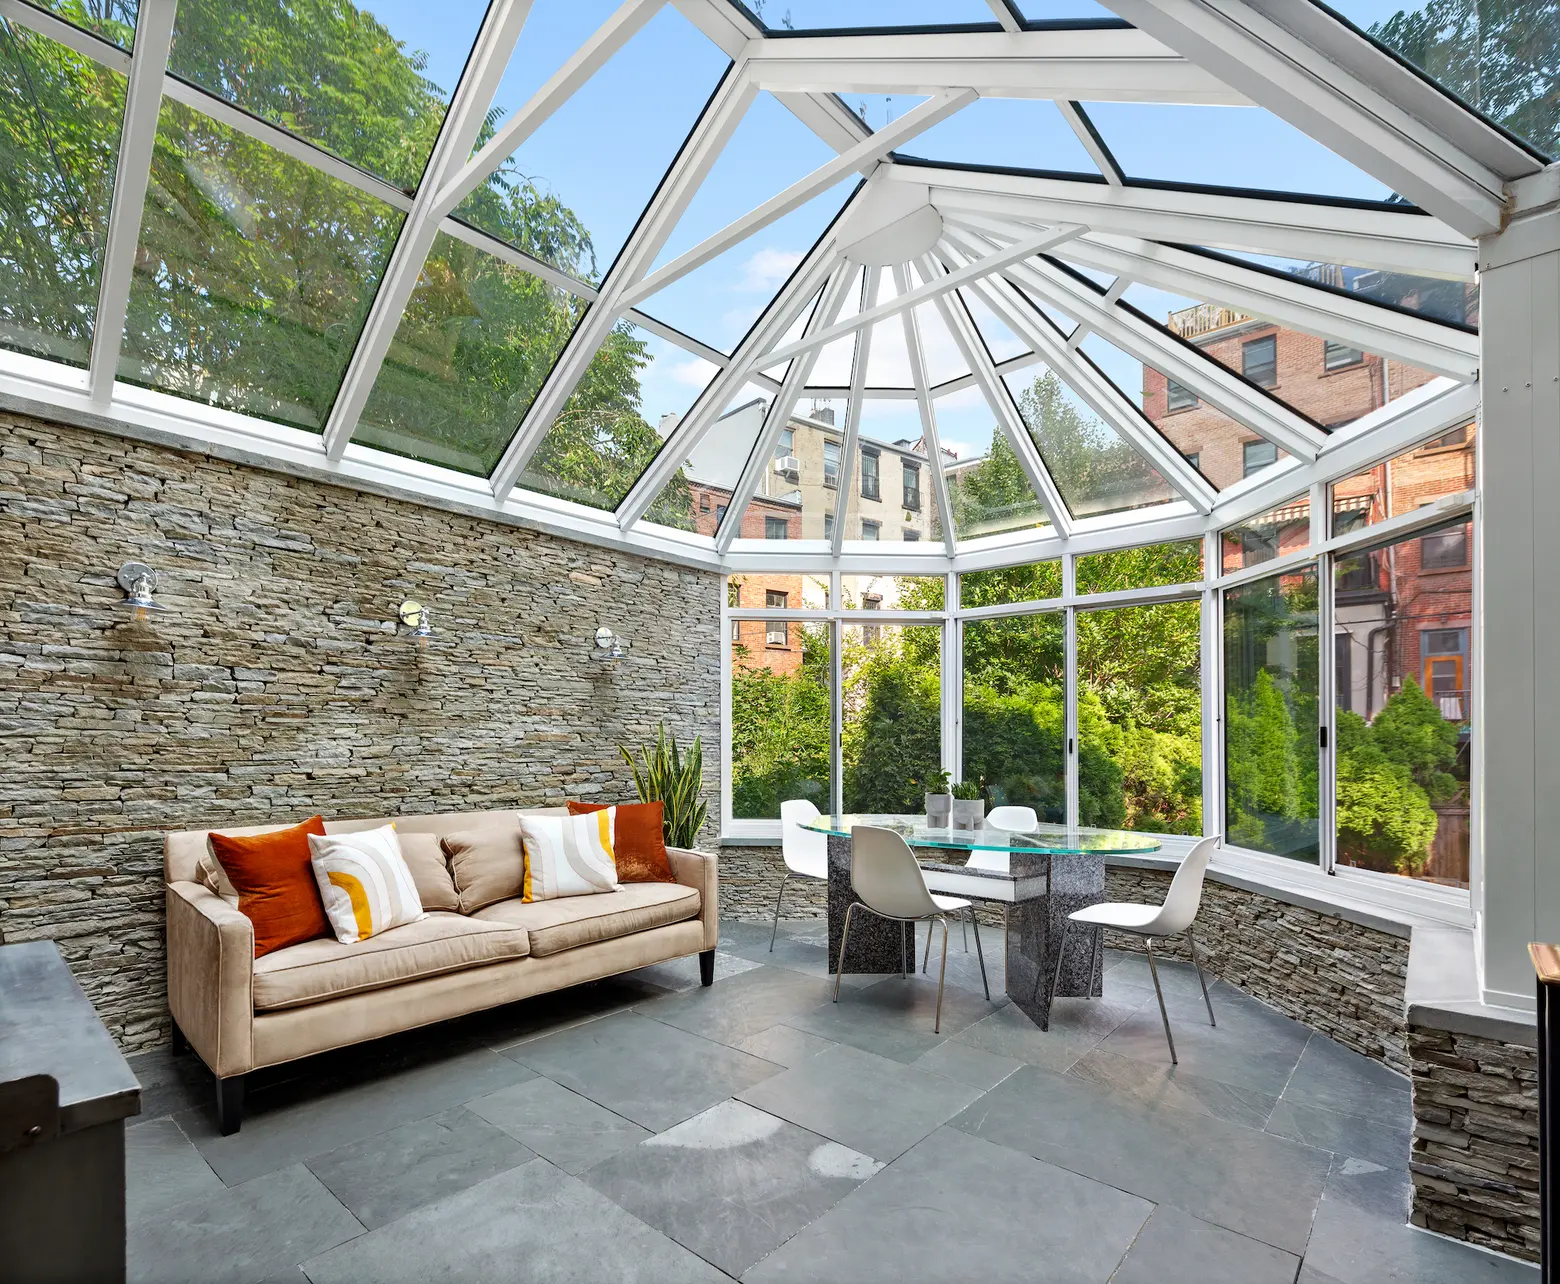 Gaze at your fairytale garden from the glass atrium in this $6.1M Fort Greene brownstone